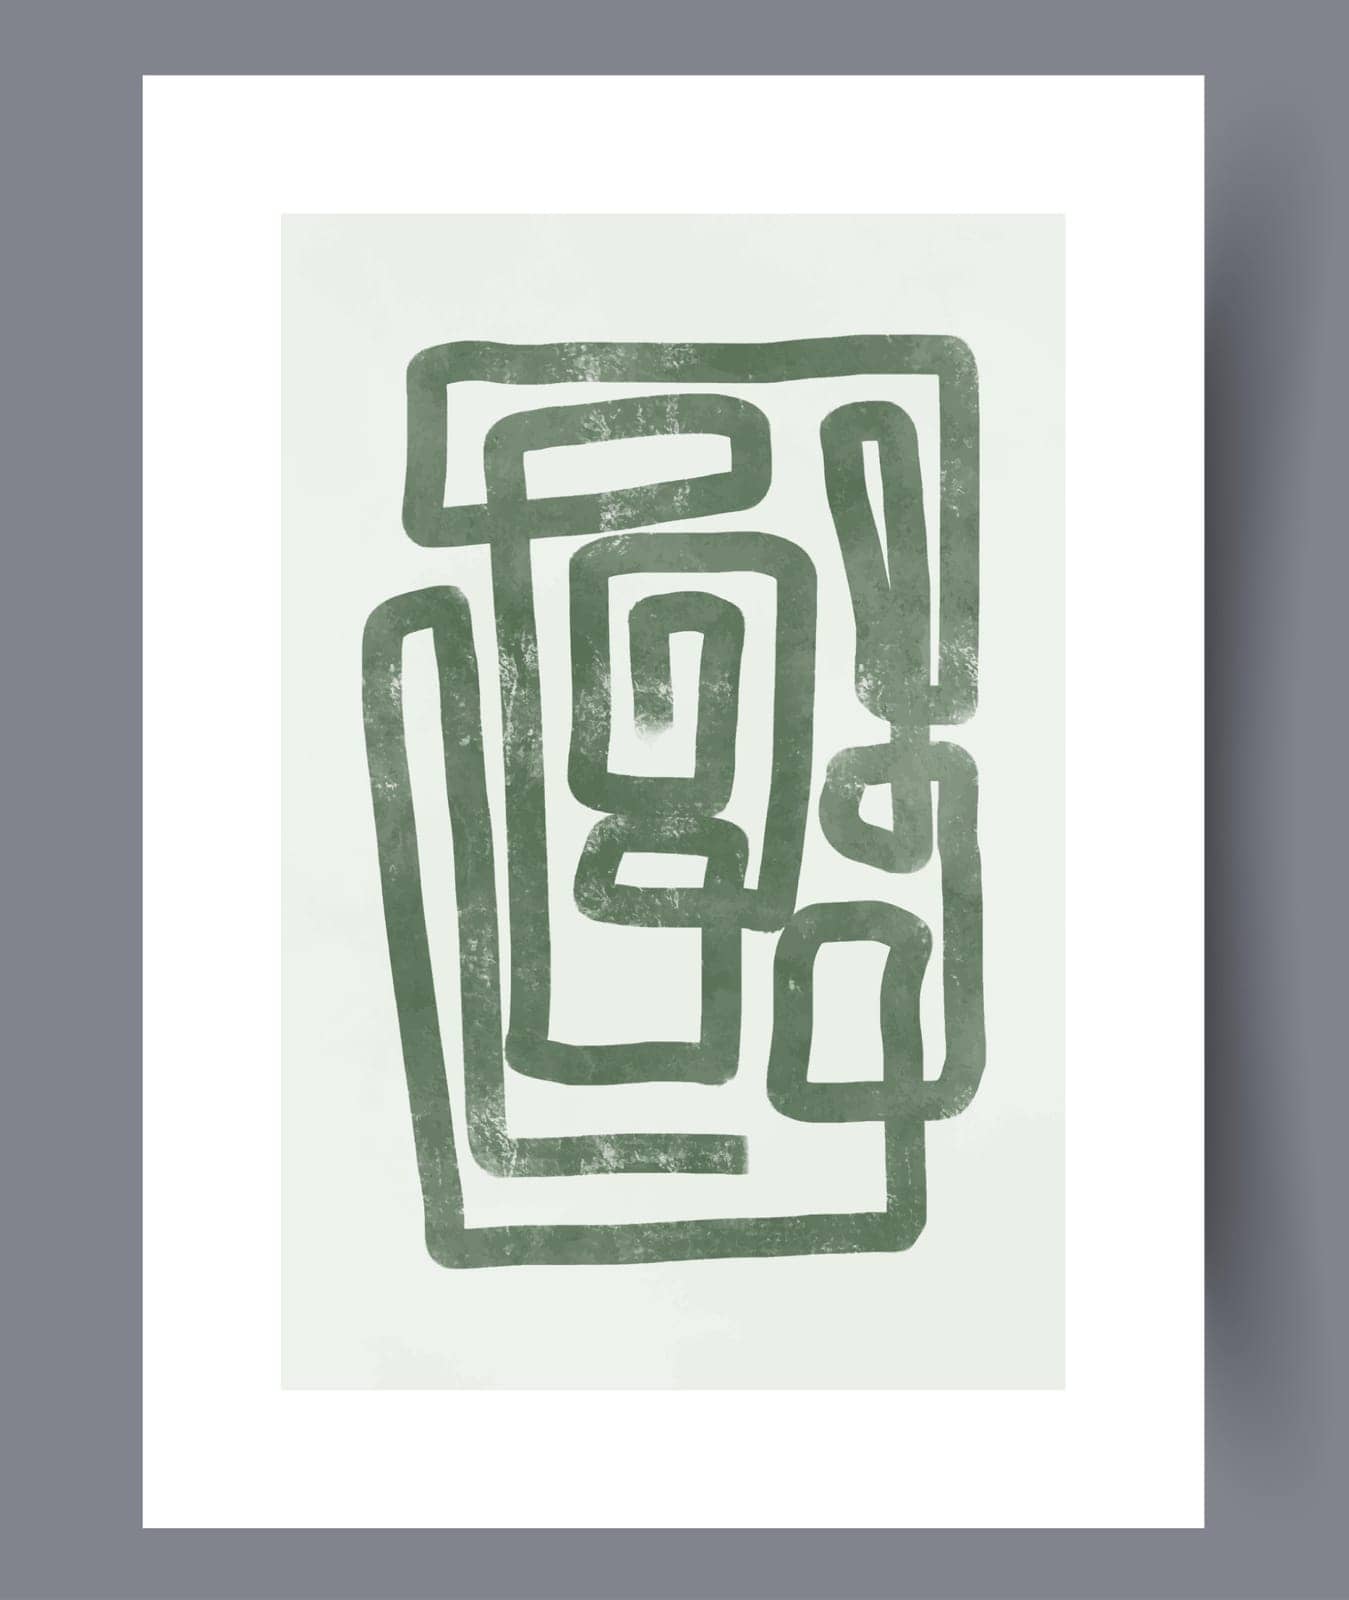 Abstract labyrinth chaotic path wall art print by aprint22com